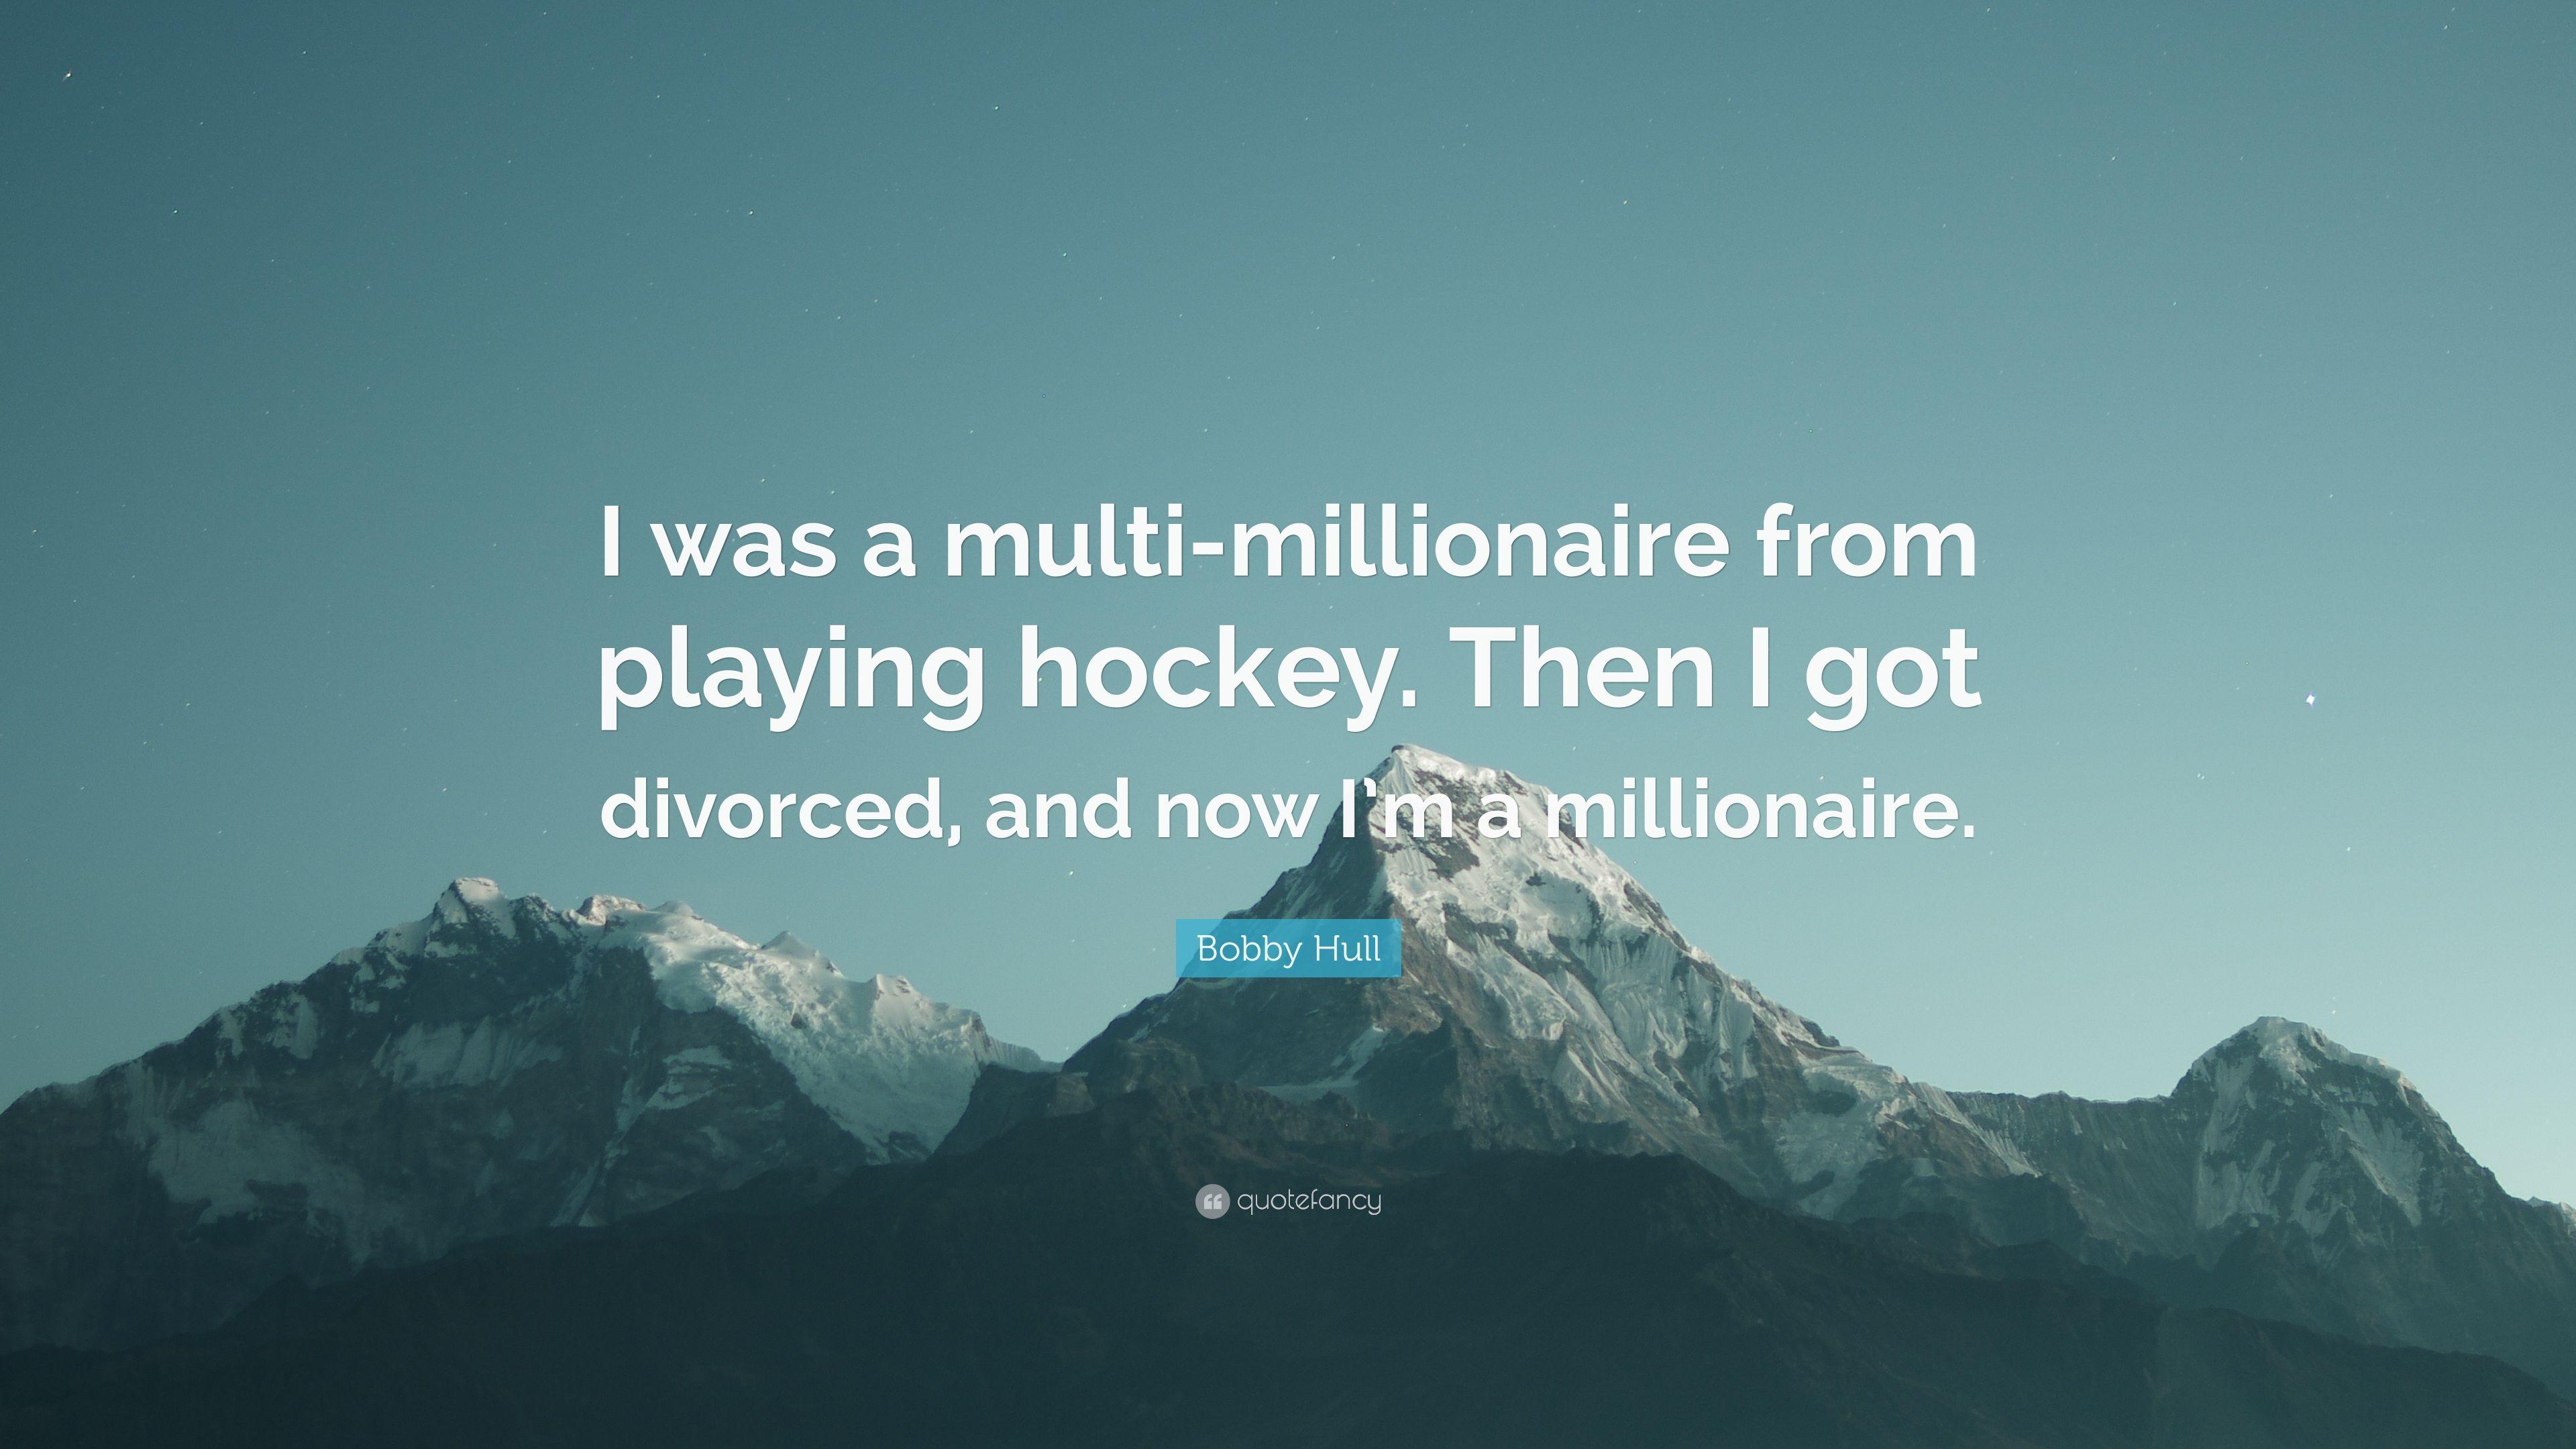 Bobby Hull Quote: “I Was A Multi Millionaire From Playing Hockey